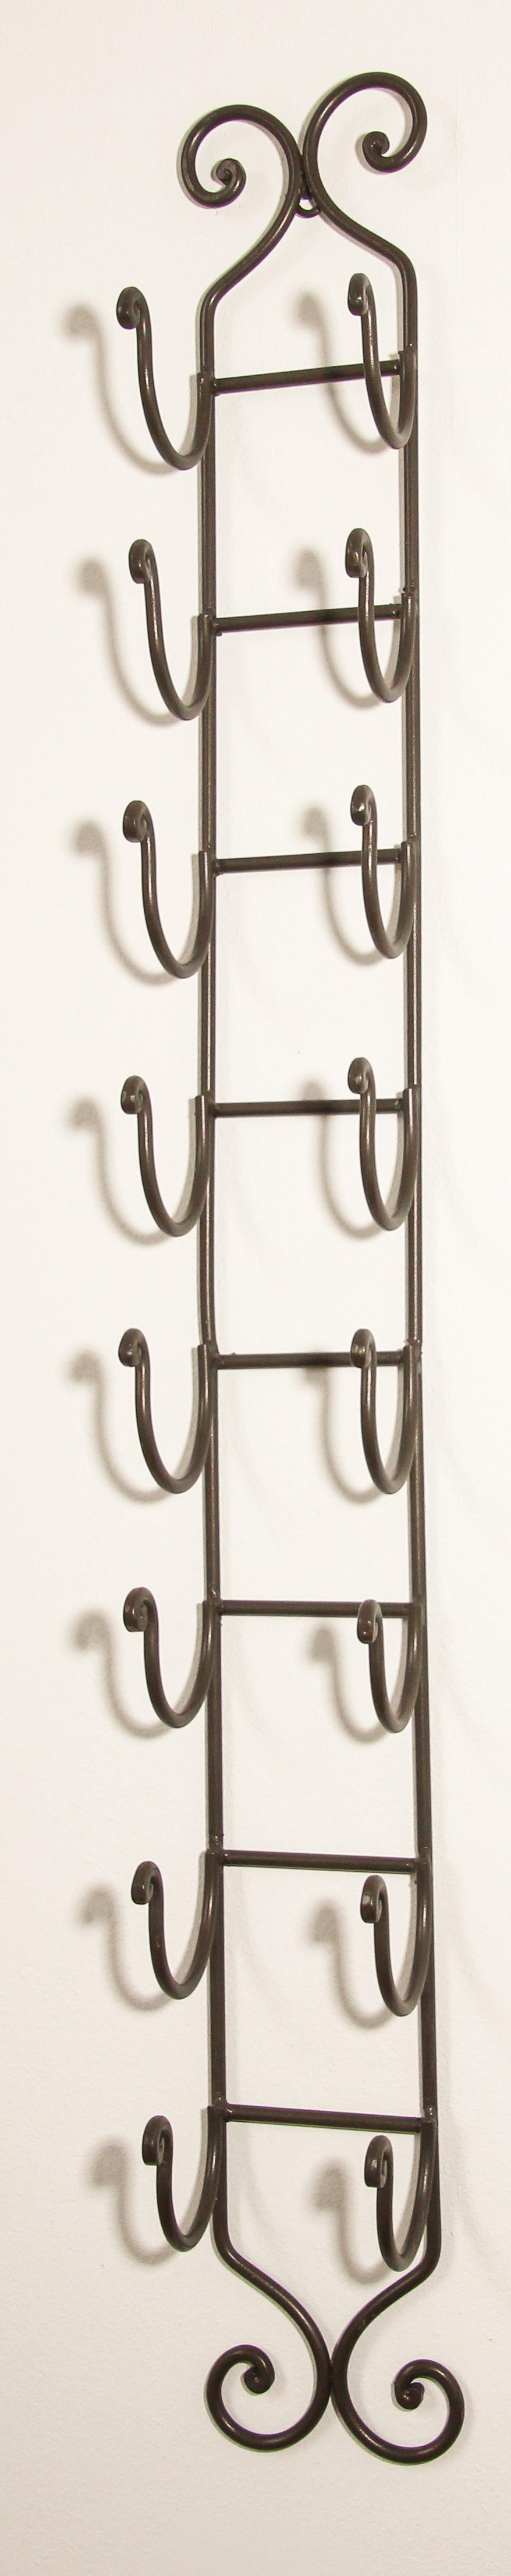 Wrought iron hand forged wall mount wine rack.
Wall mount wine rack in wrought iron finish, the open metal design draws attention to your most coveted wine labels.
Beautiful and functional scrolled wall mount bottle holder.
This handcrafted